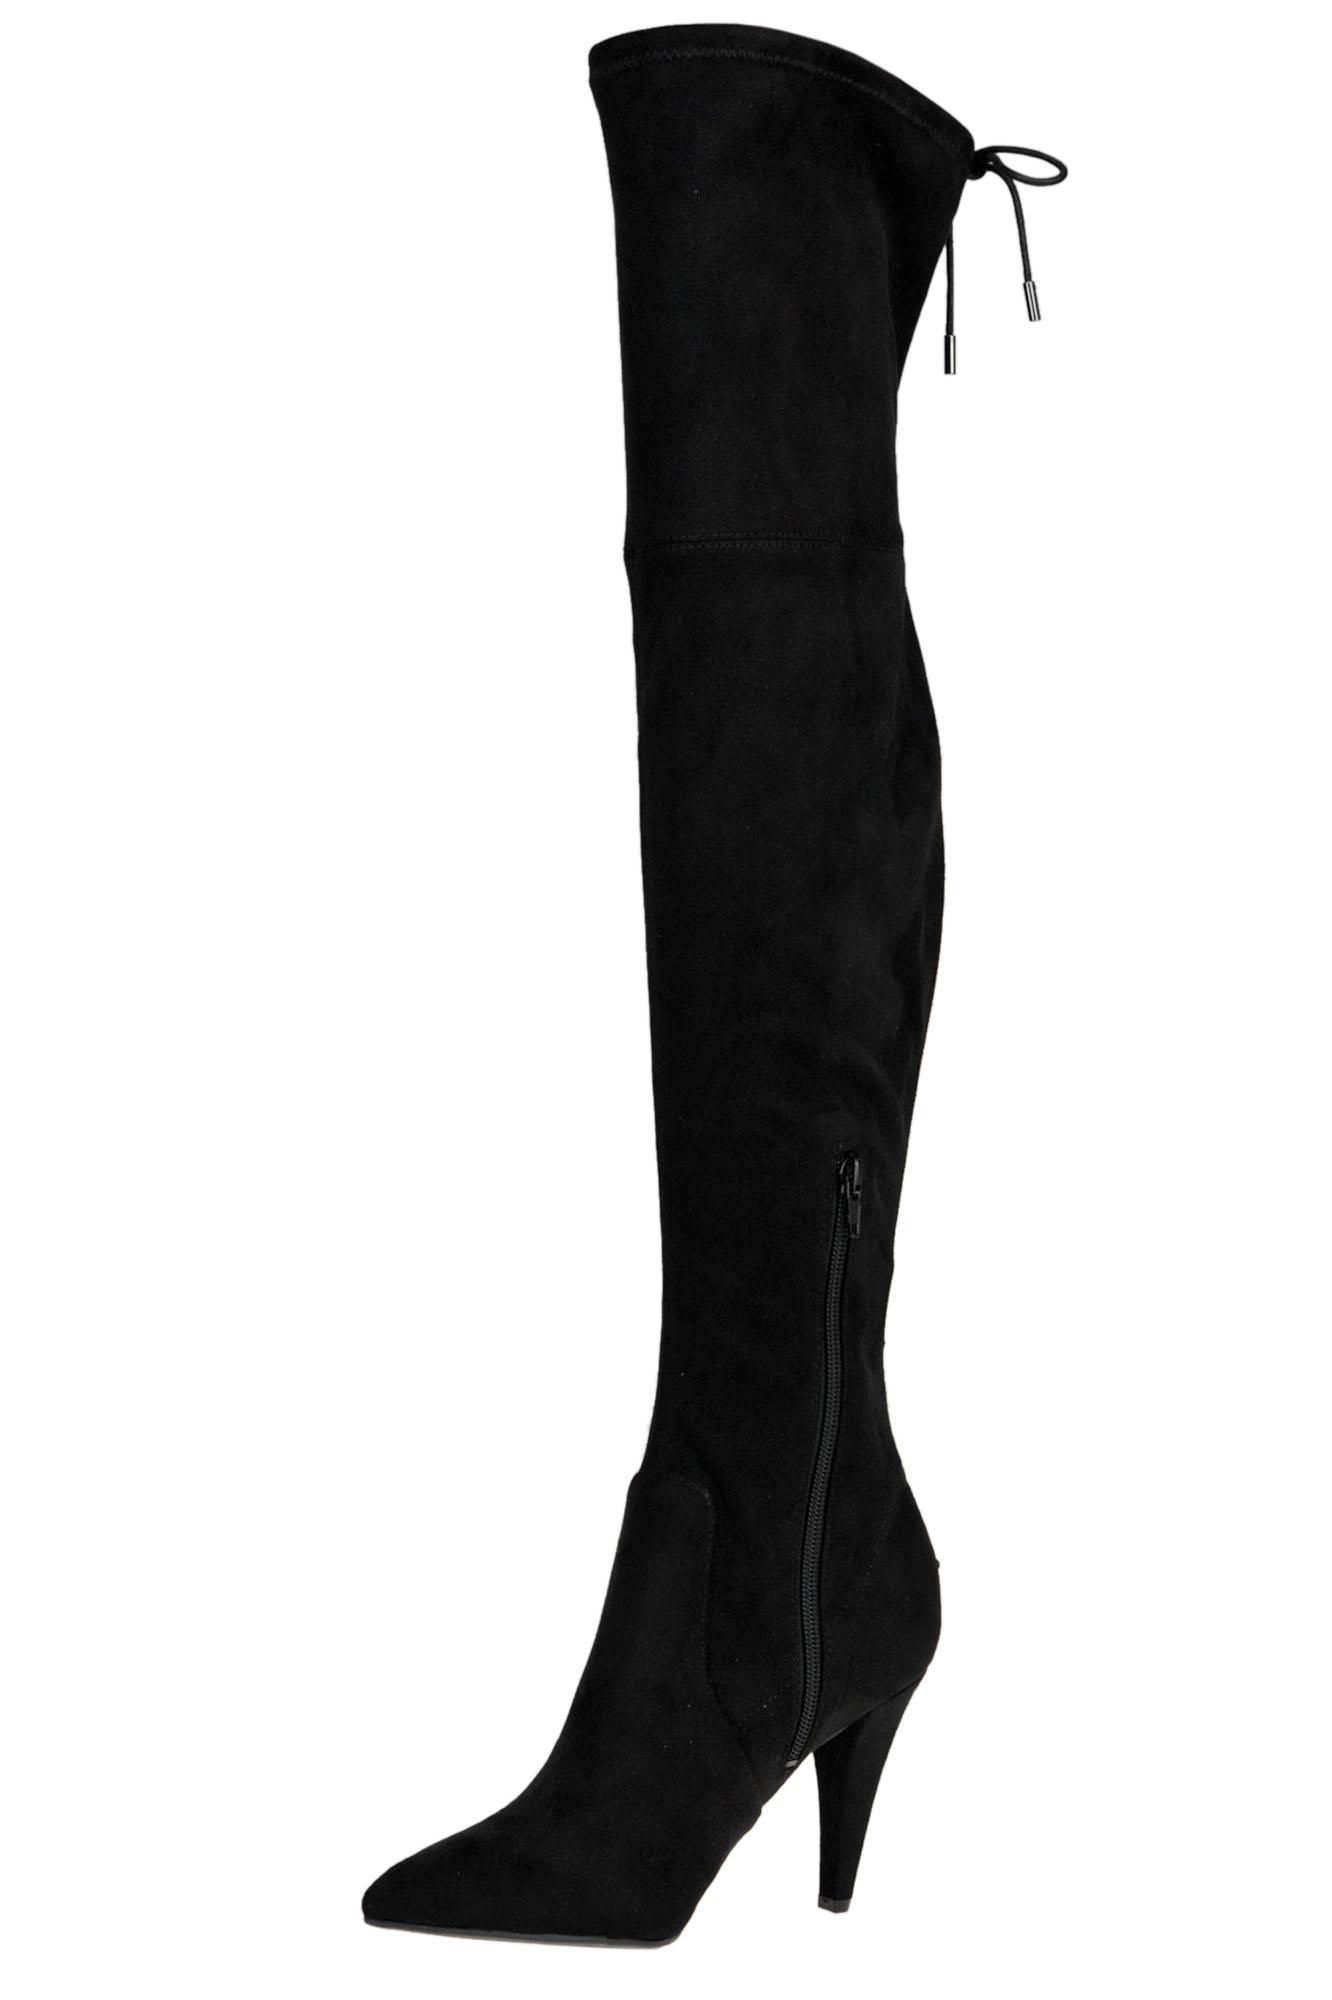 Guess Over The Knee Suede Boots in Black - Lyst